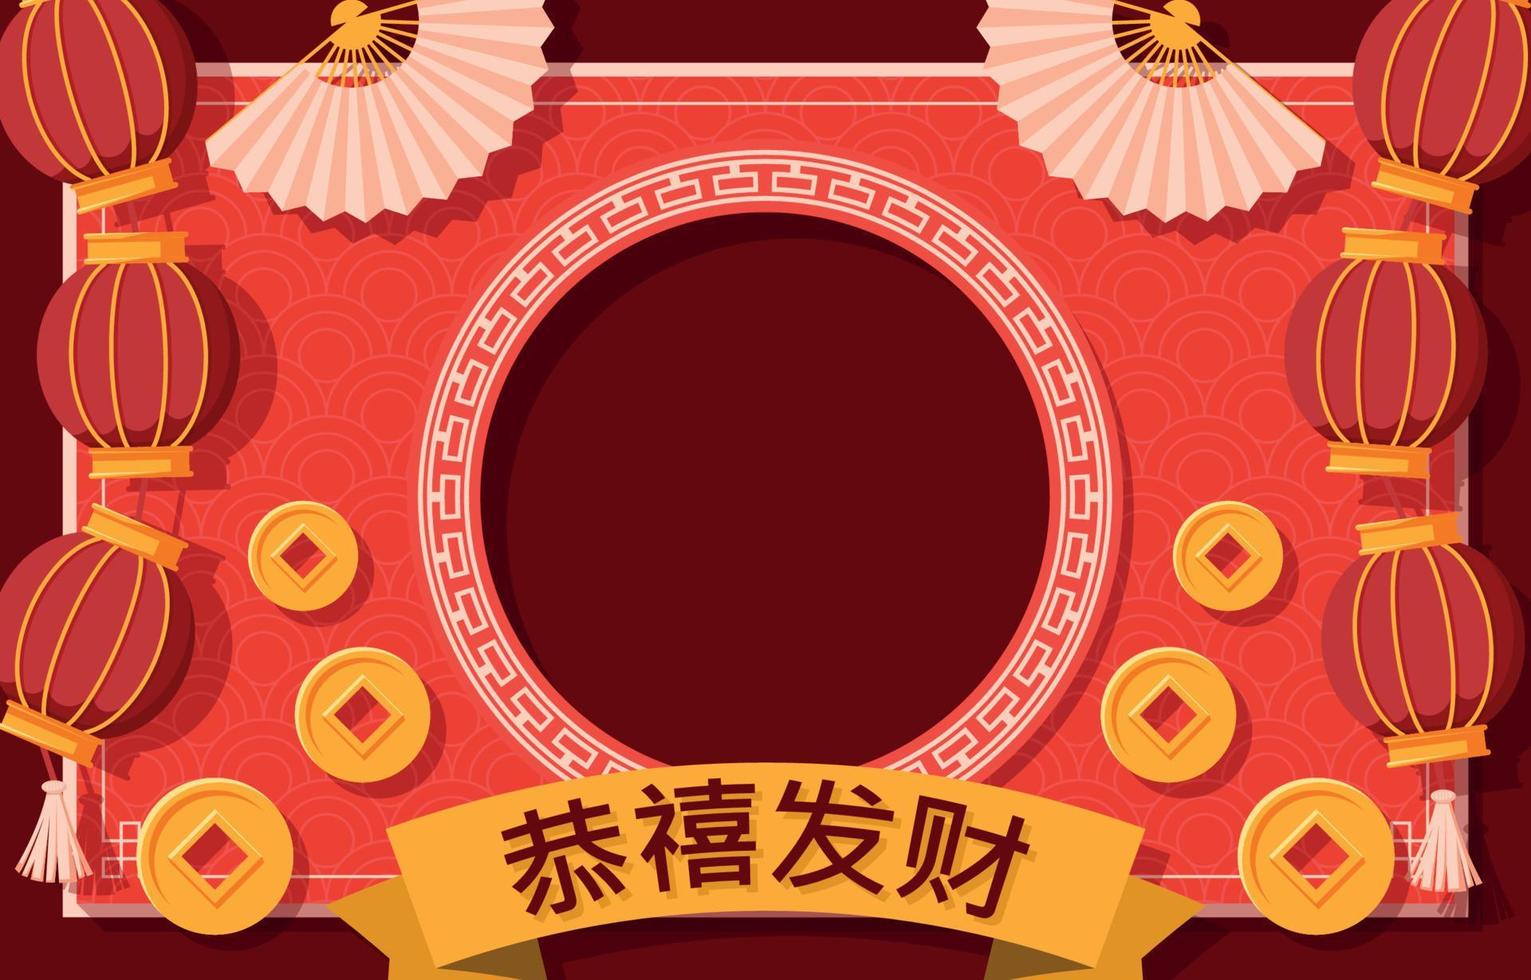 Chinese New Year Background with Lanterns and Coins vector